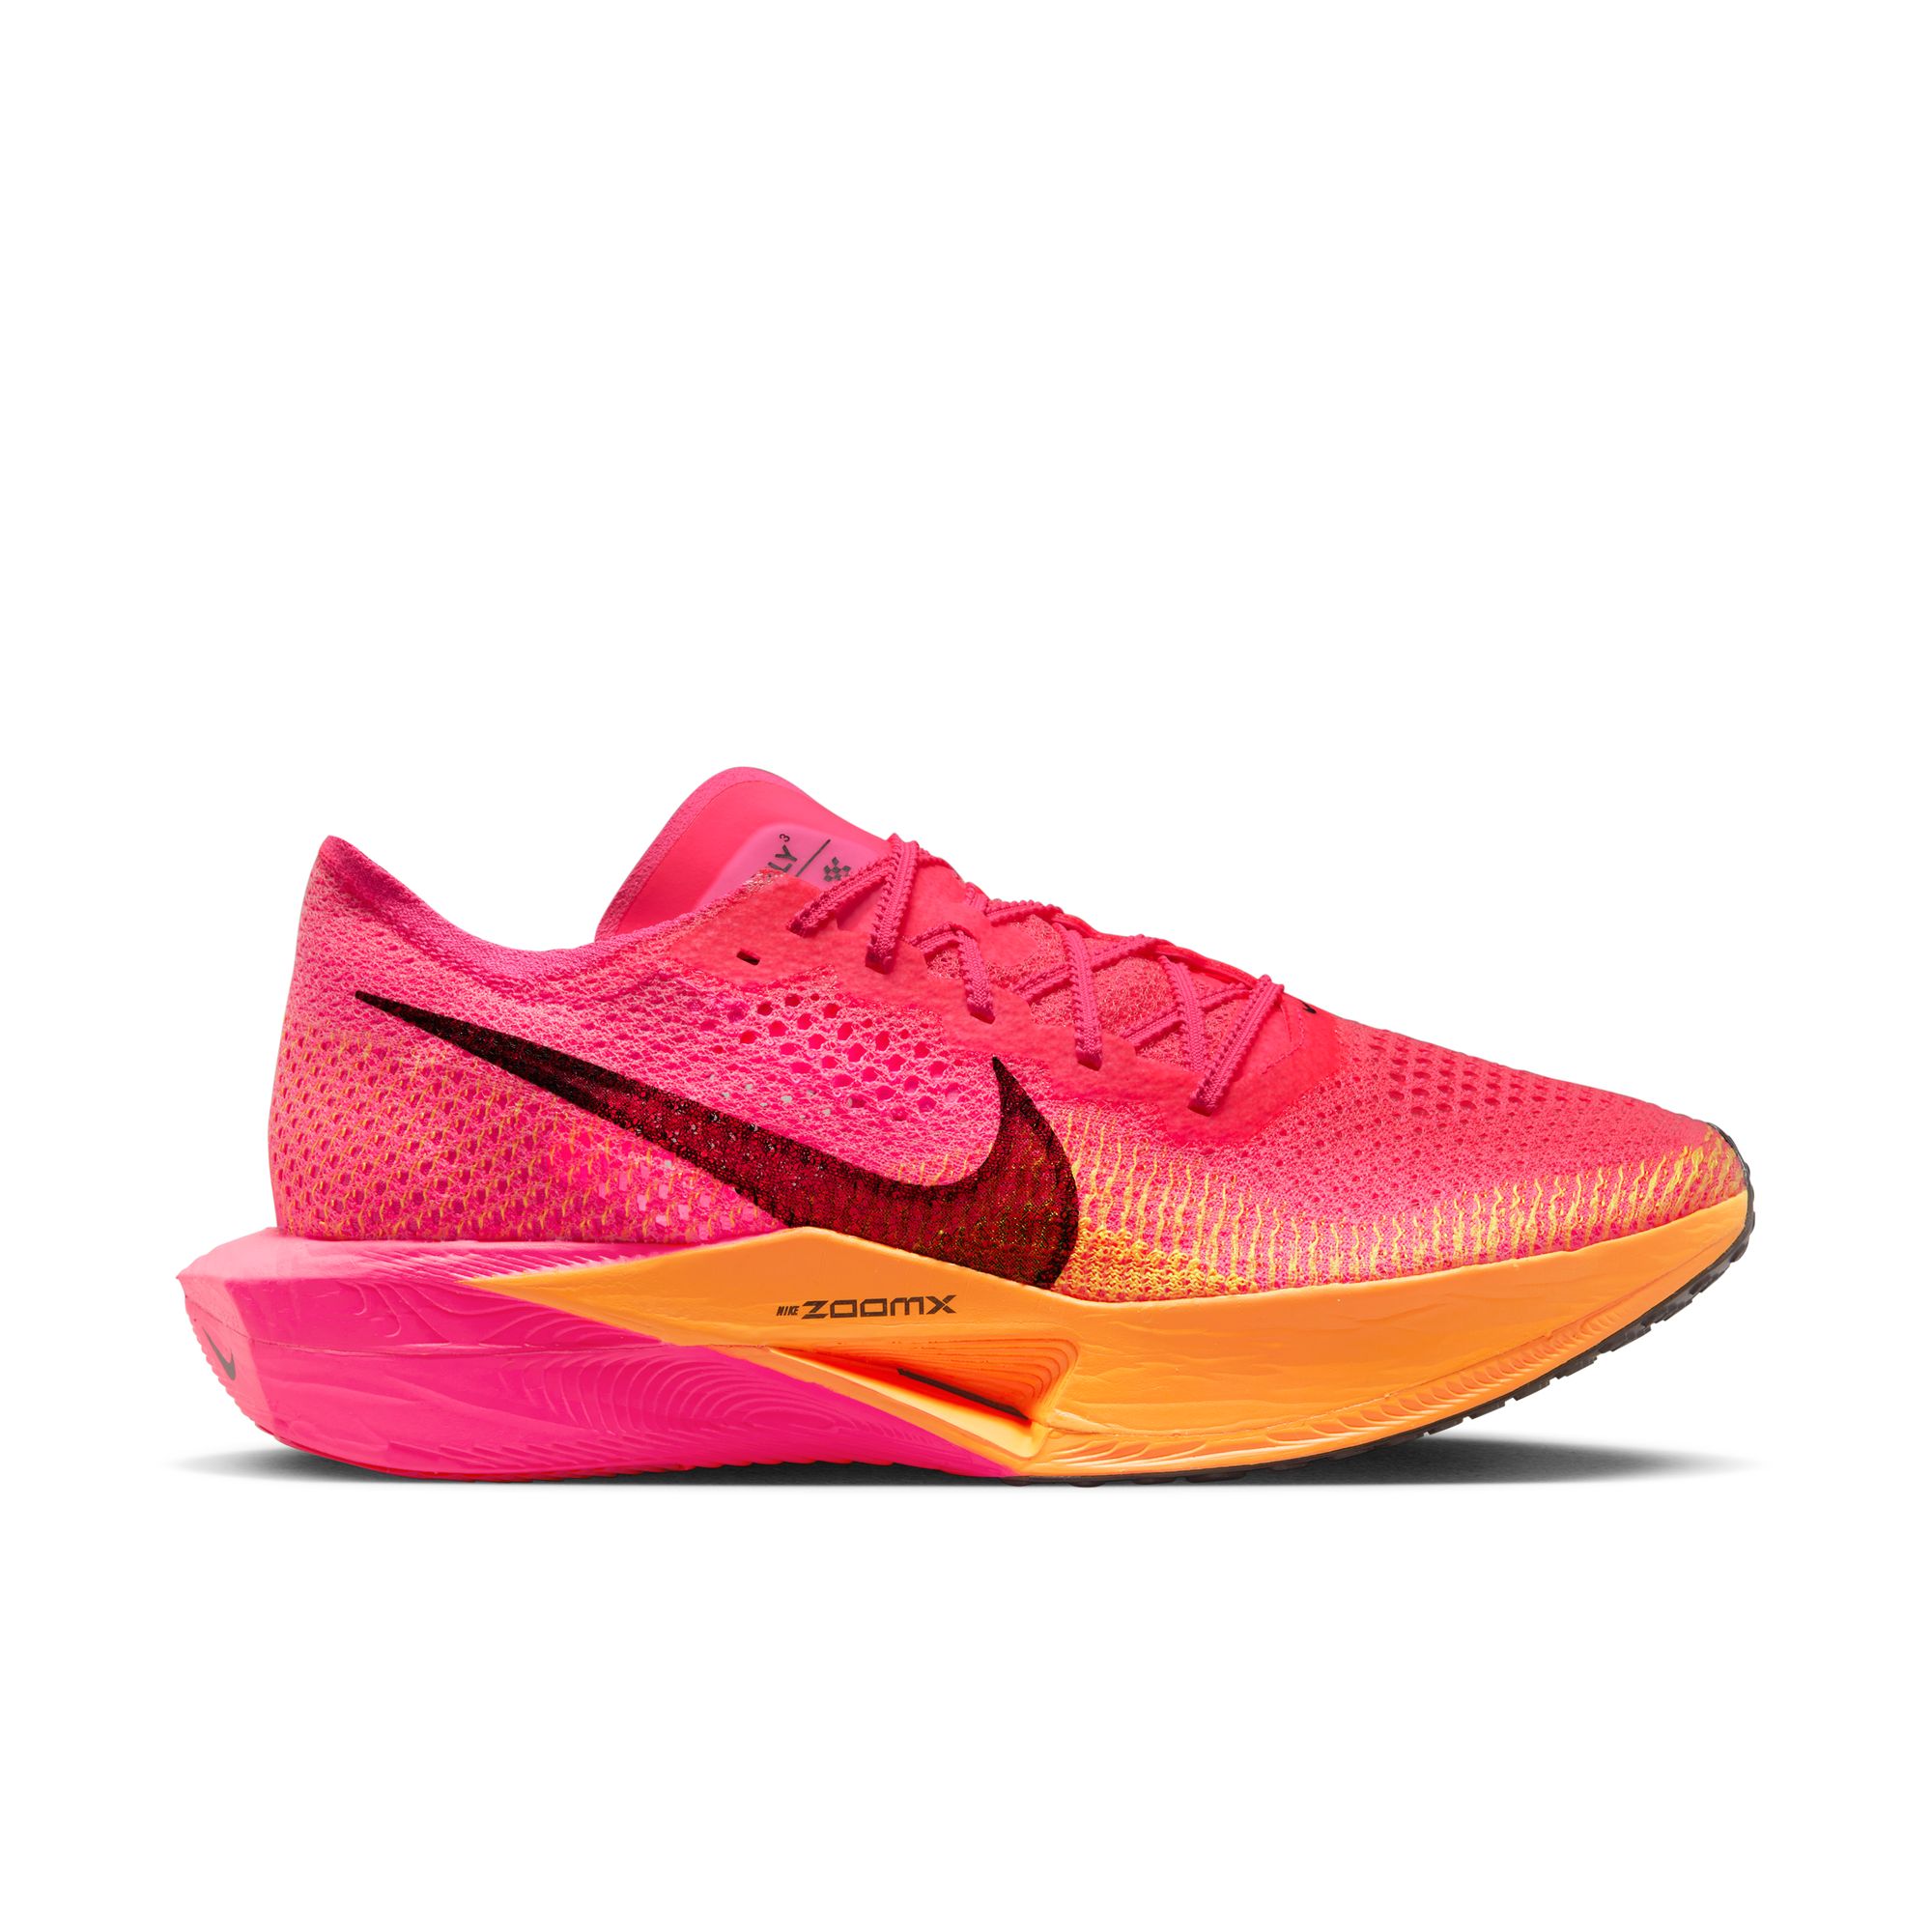 Nike Vaporfly 3 - The Running Company - Running Shoe Specialists